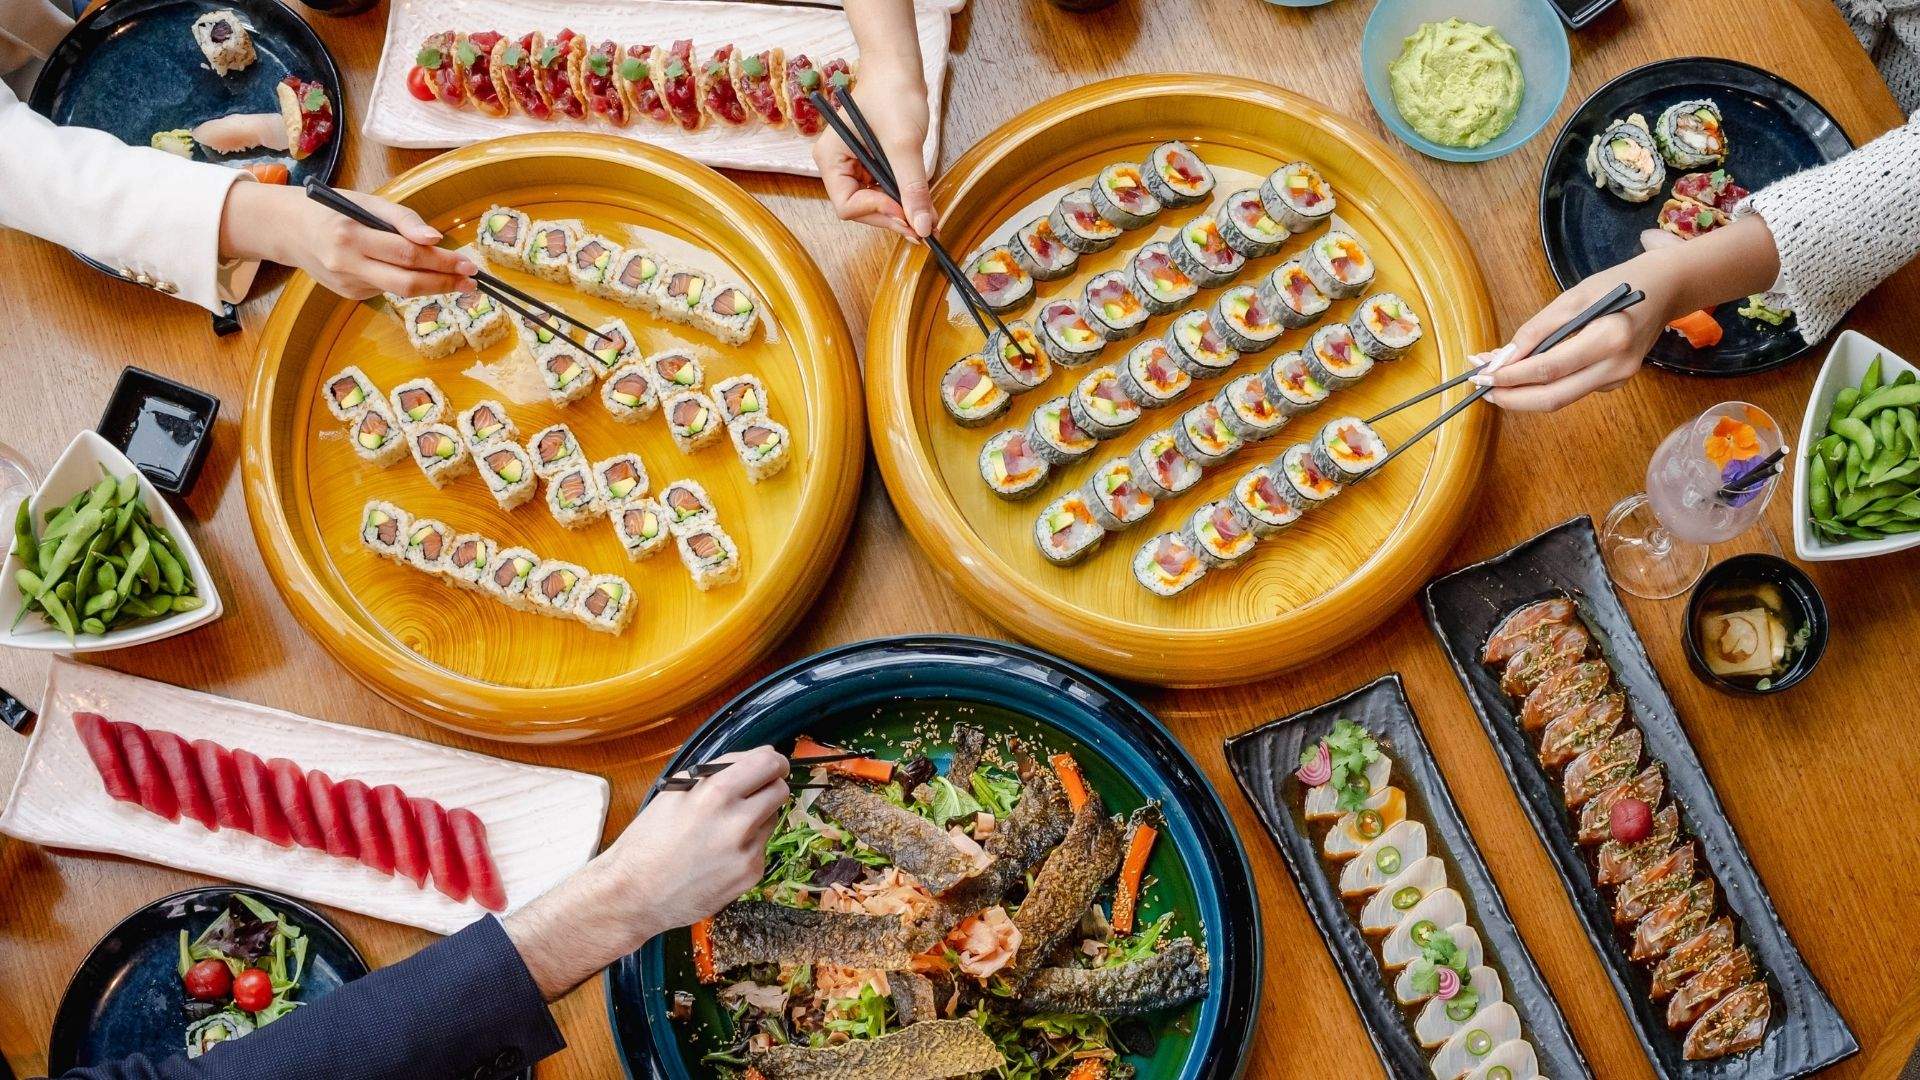 Sushi trays available for Nobu's all-you-can-eat lunch offering.